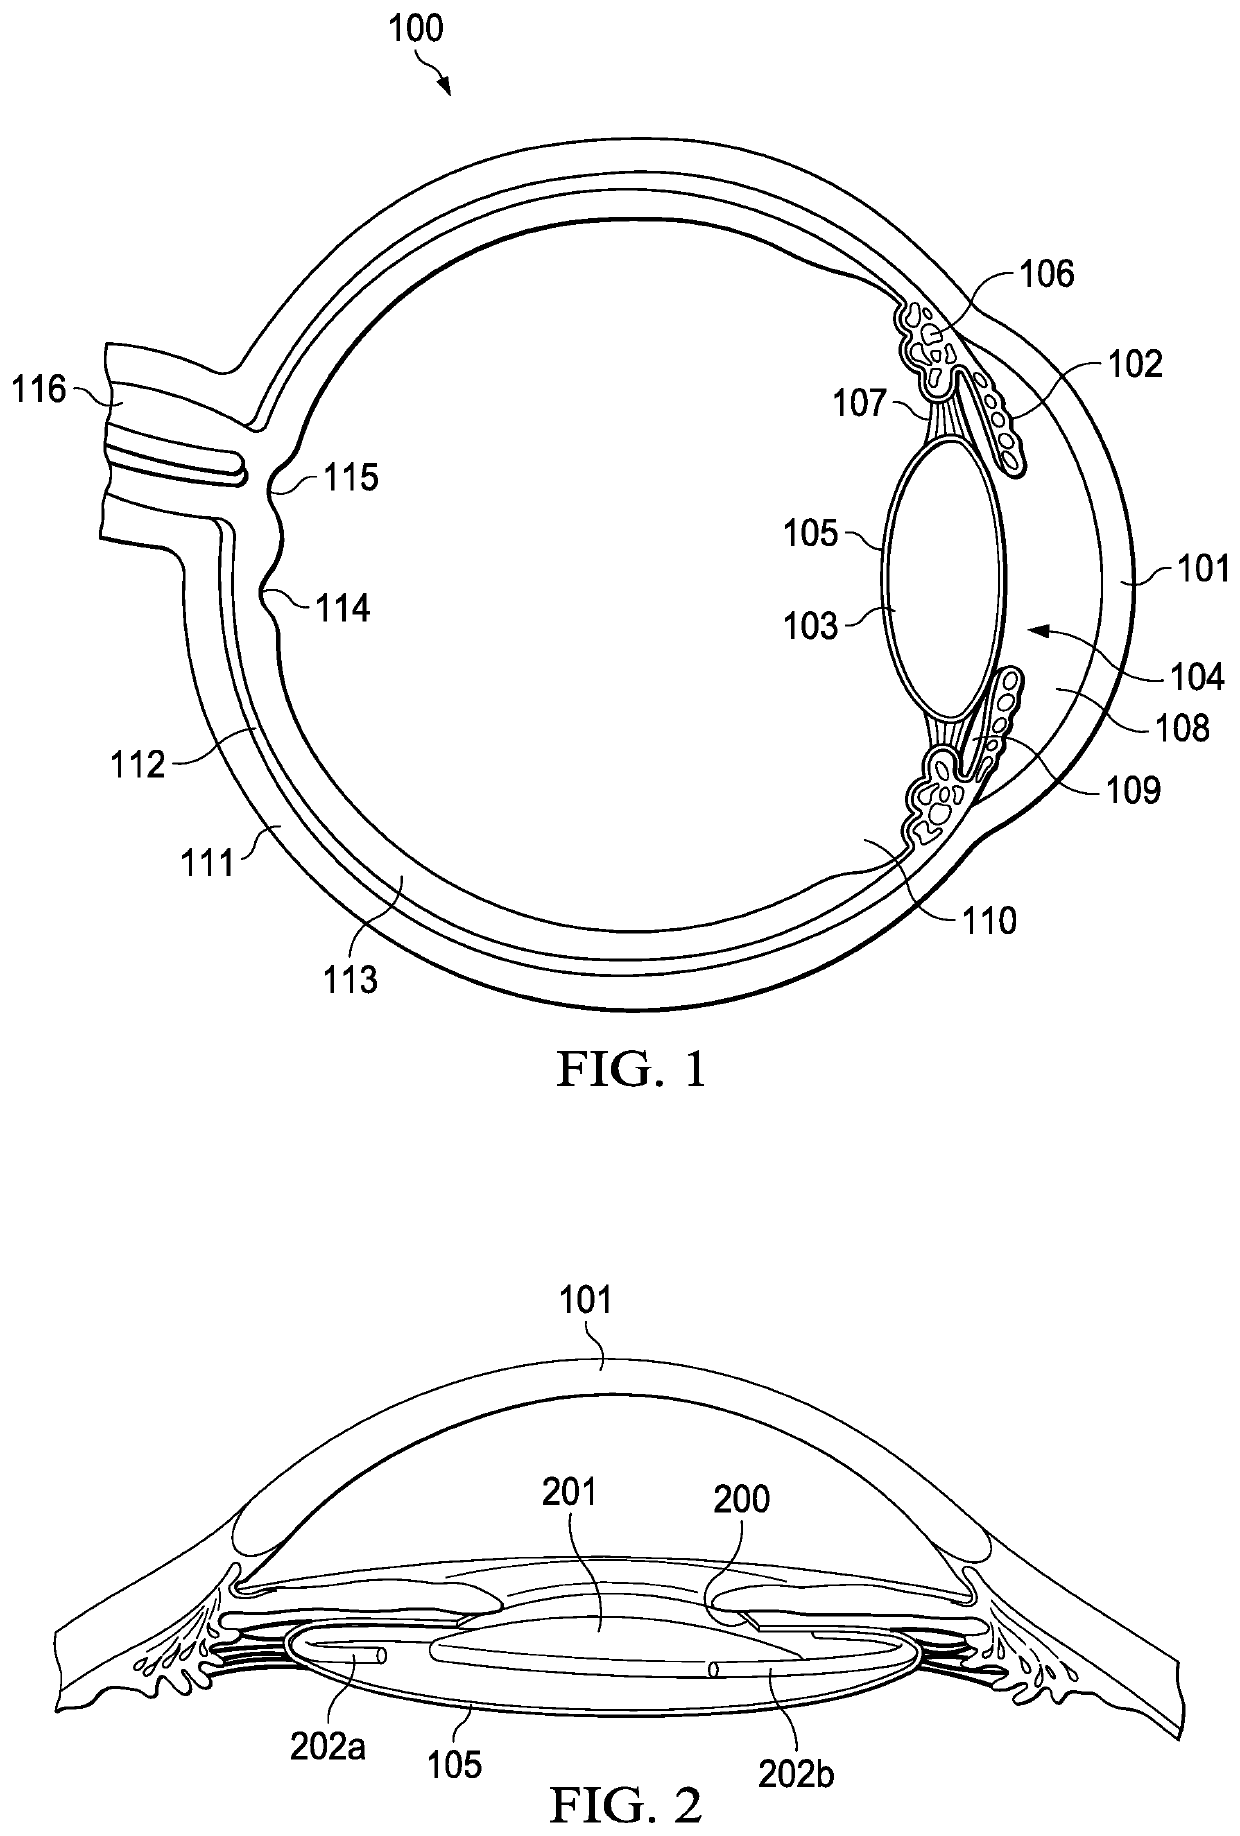 Vision correction systems and methods for using an intraocular lens enclosed in an inner capsulated bag